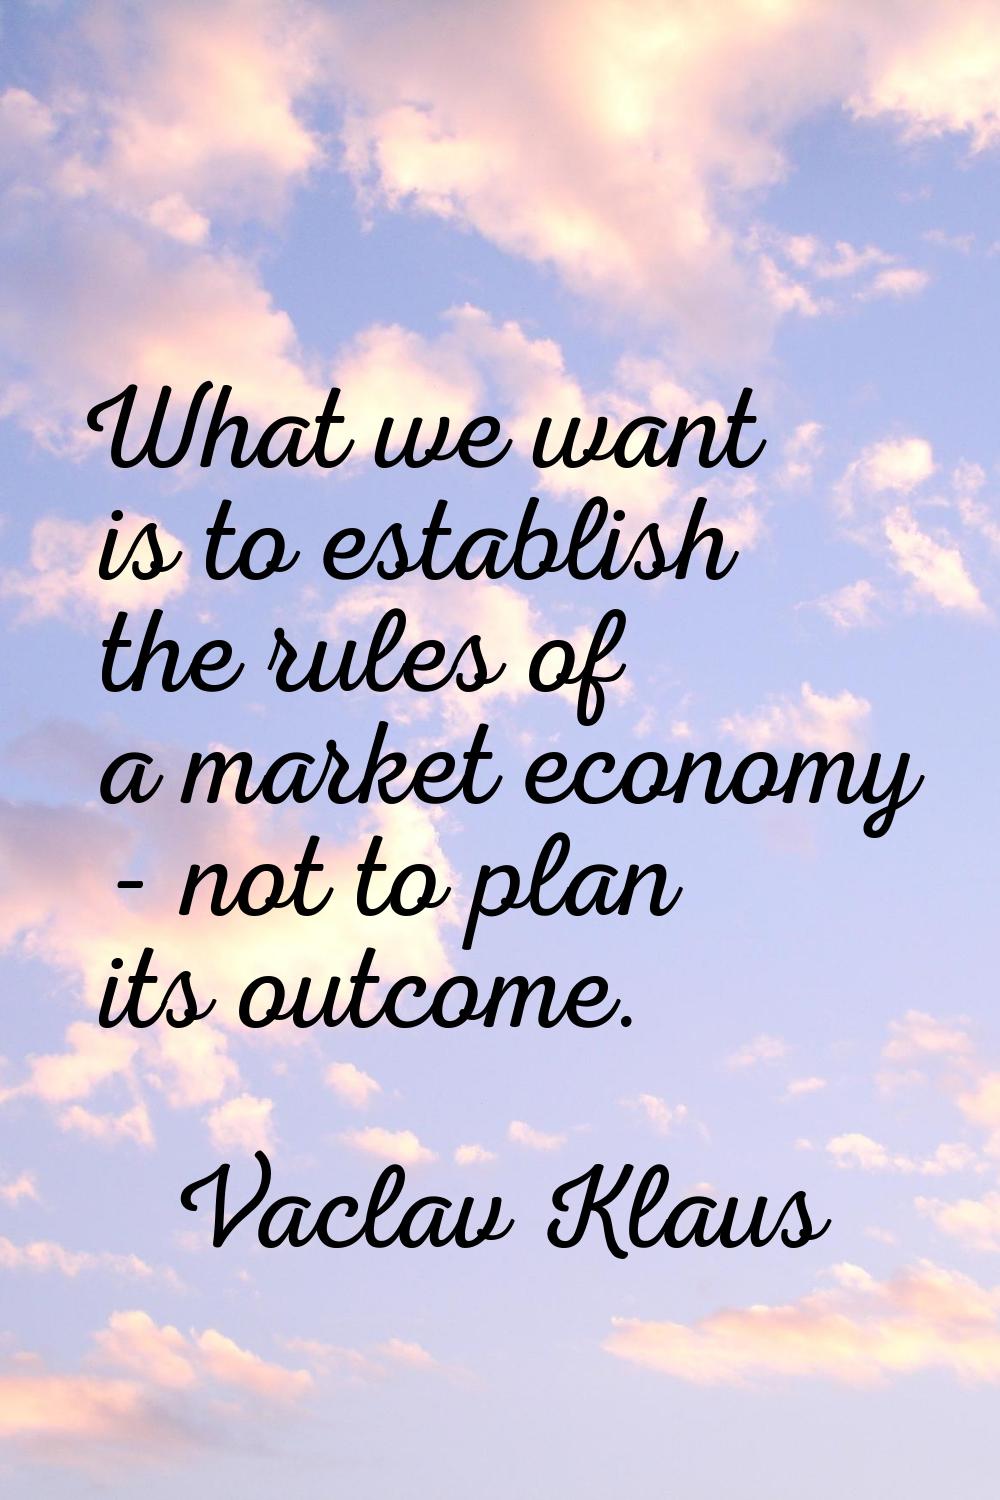 What we want is to establish the rules of a market economy - not to plan its outcome.